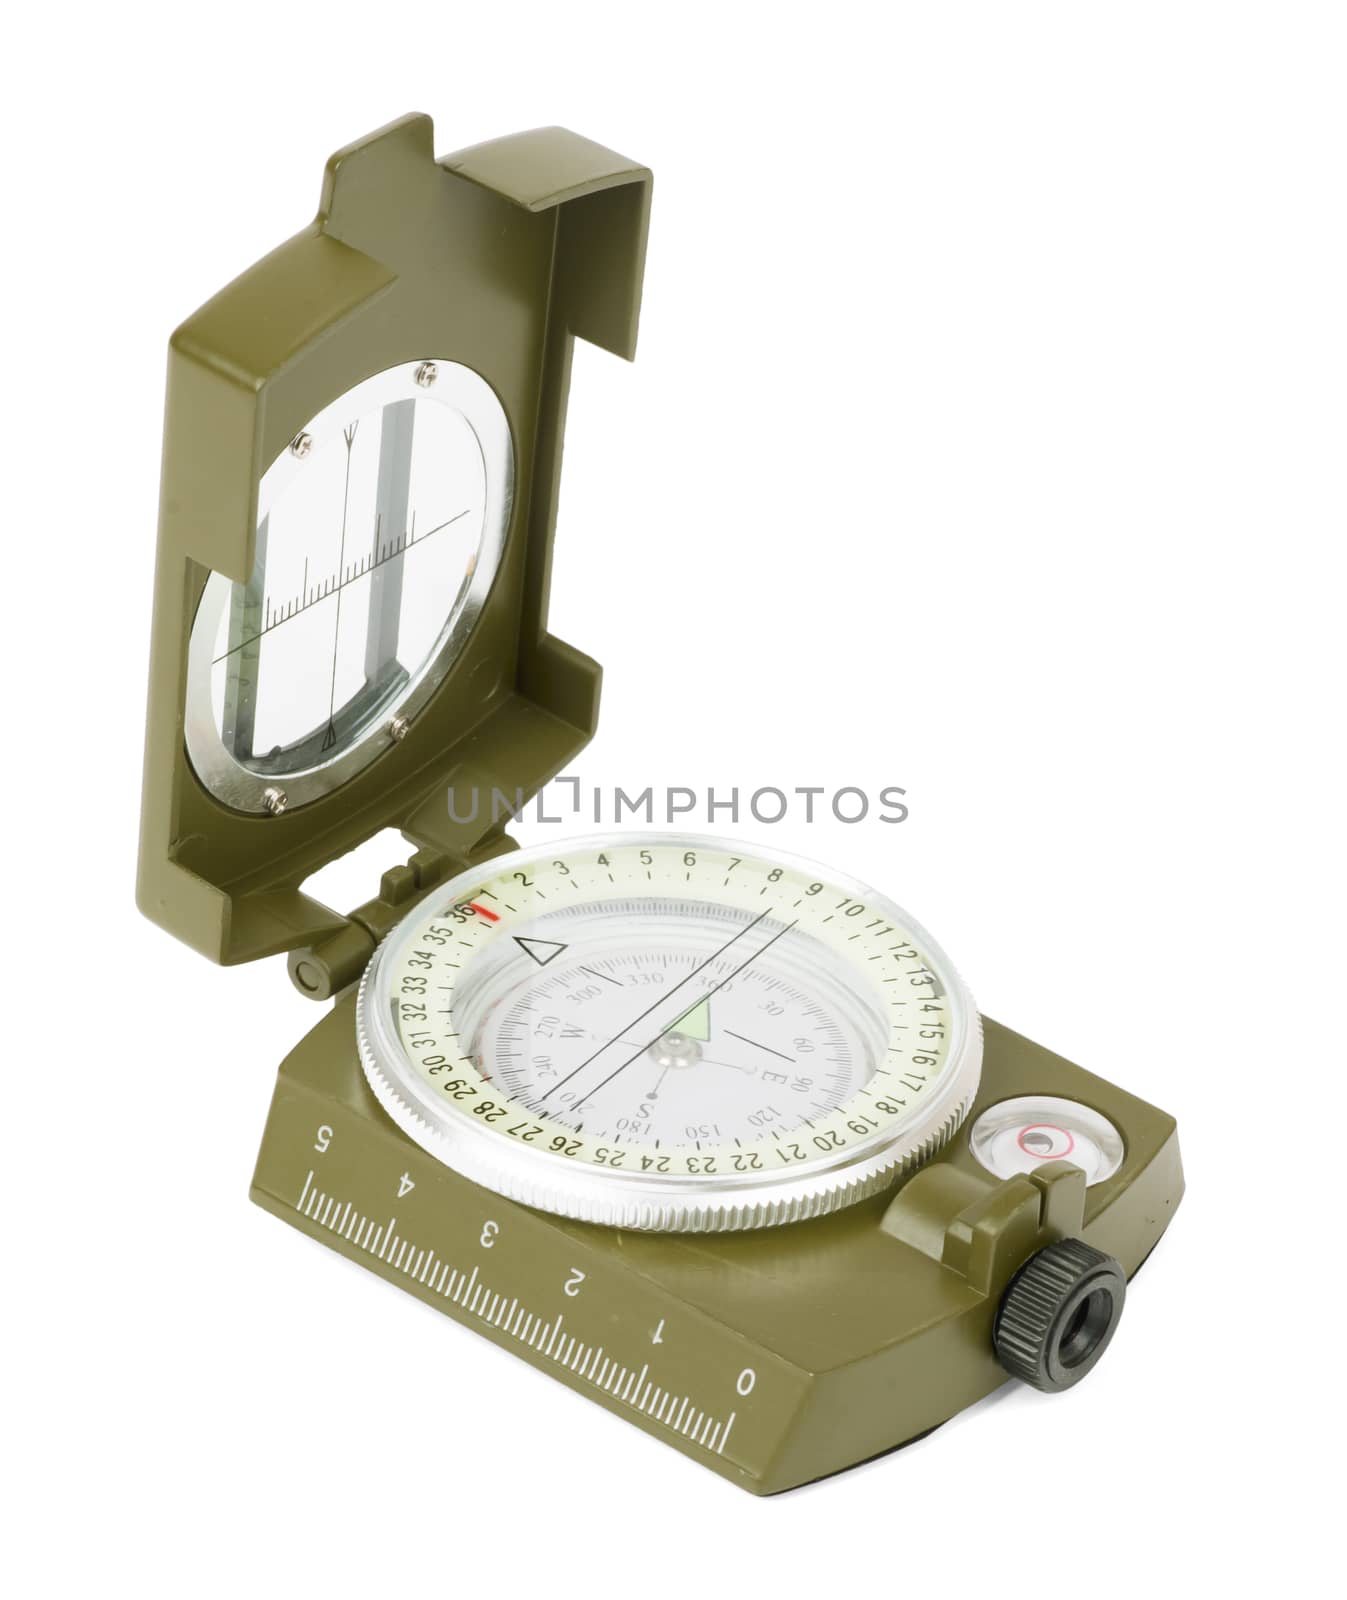 Vintage compass on white by cherezoff